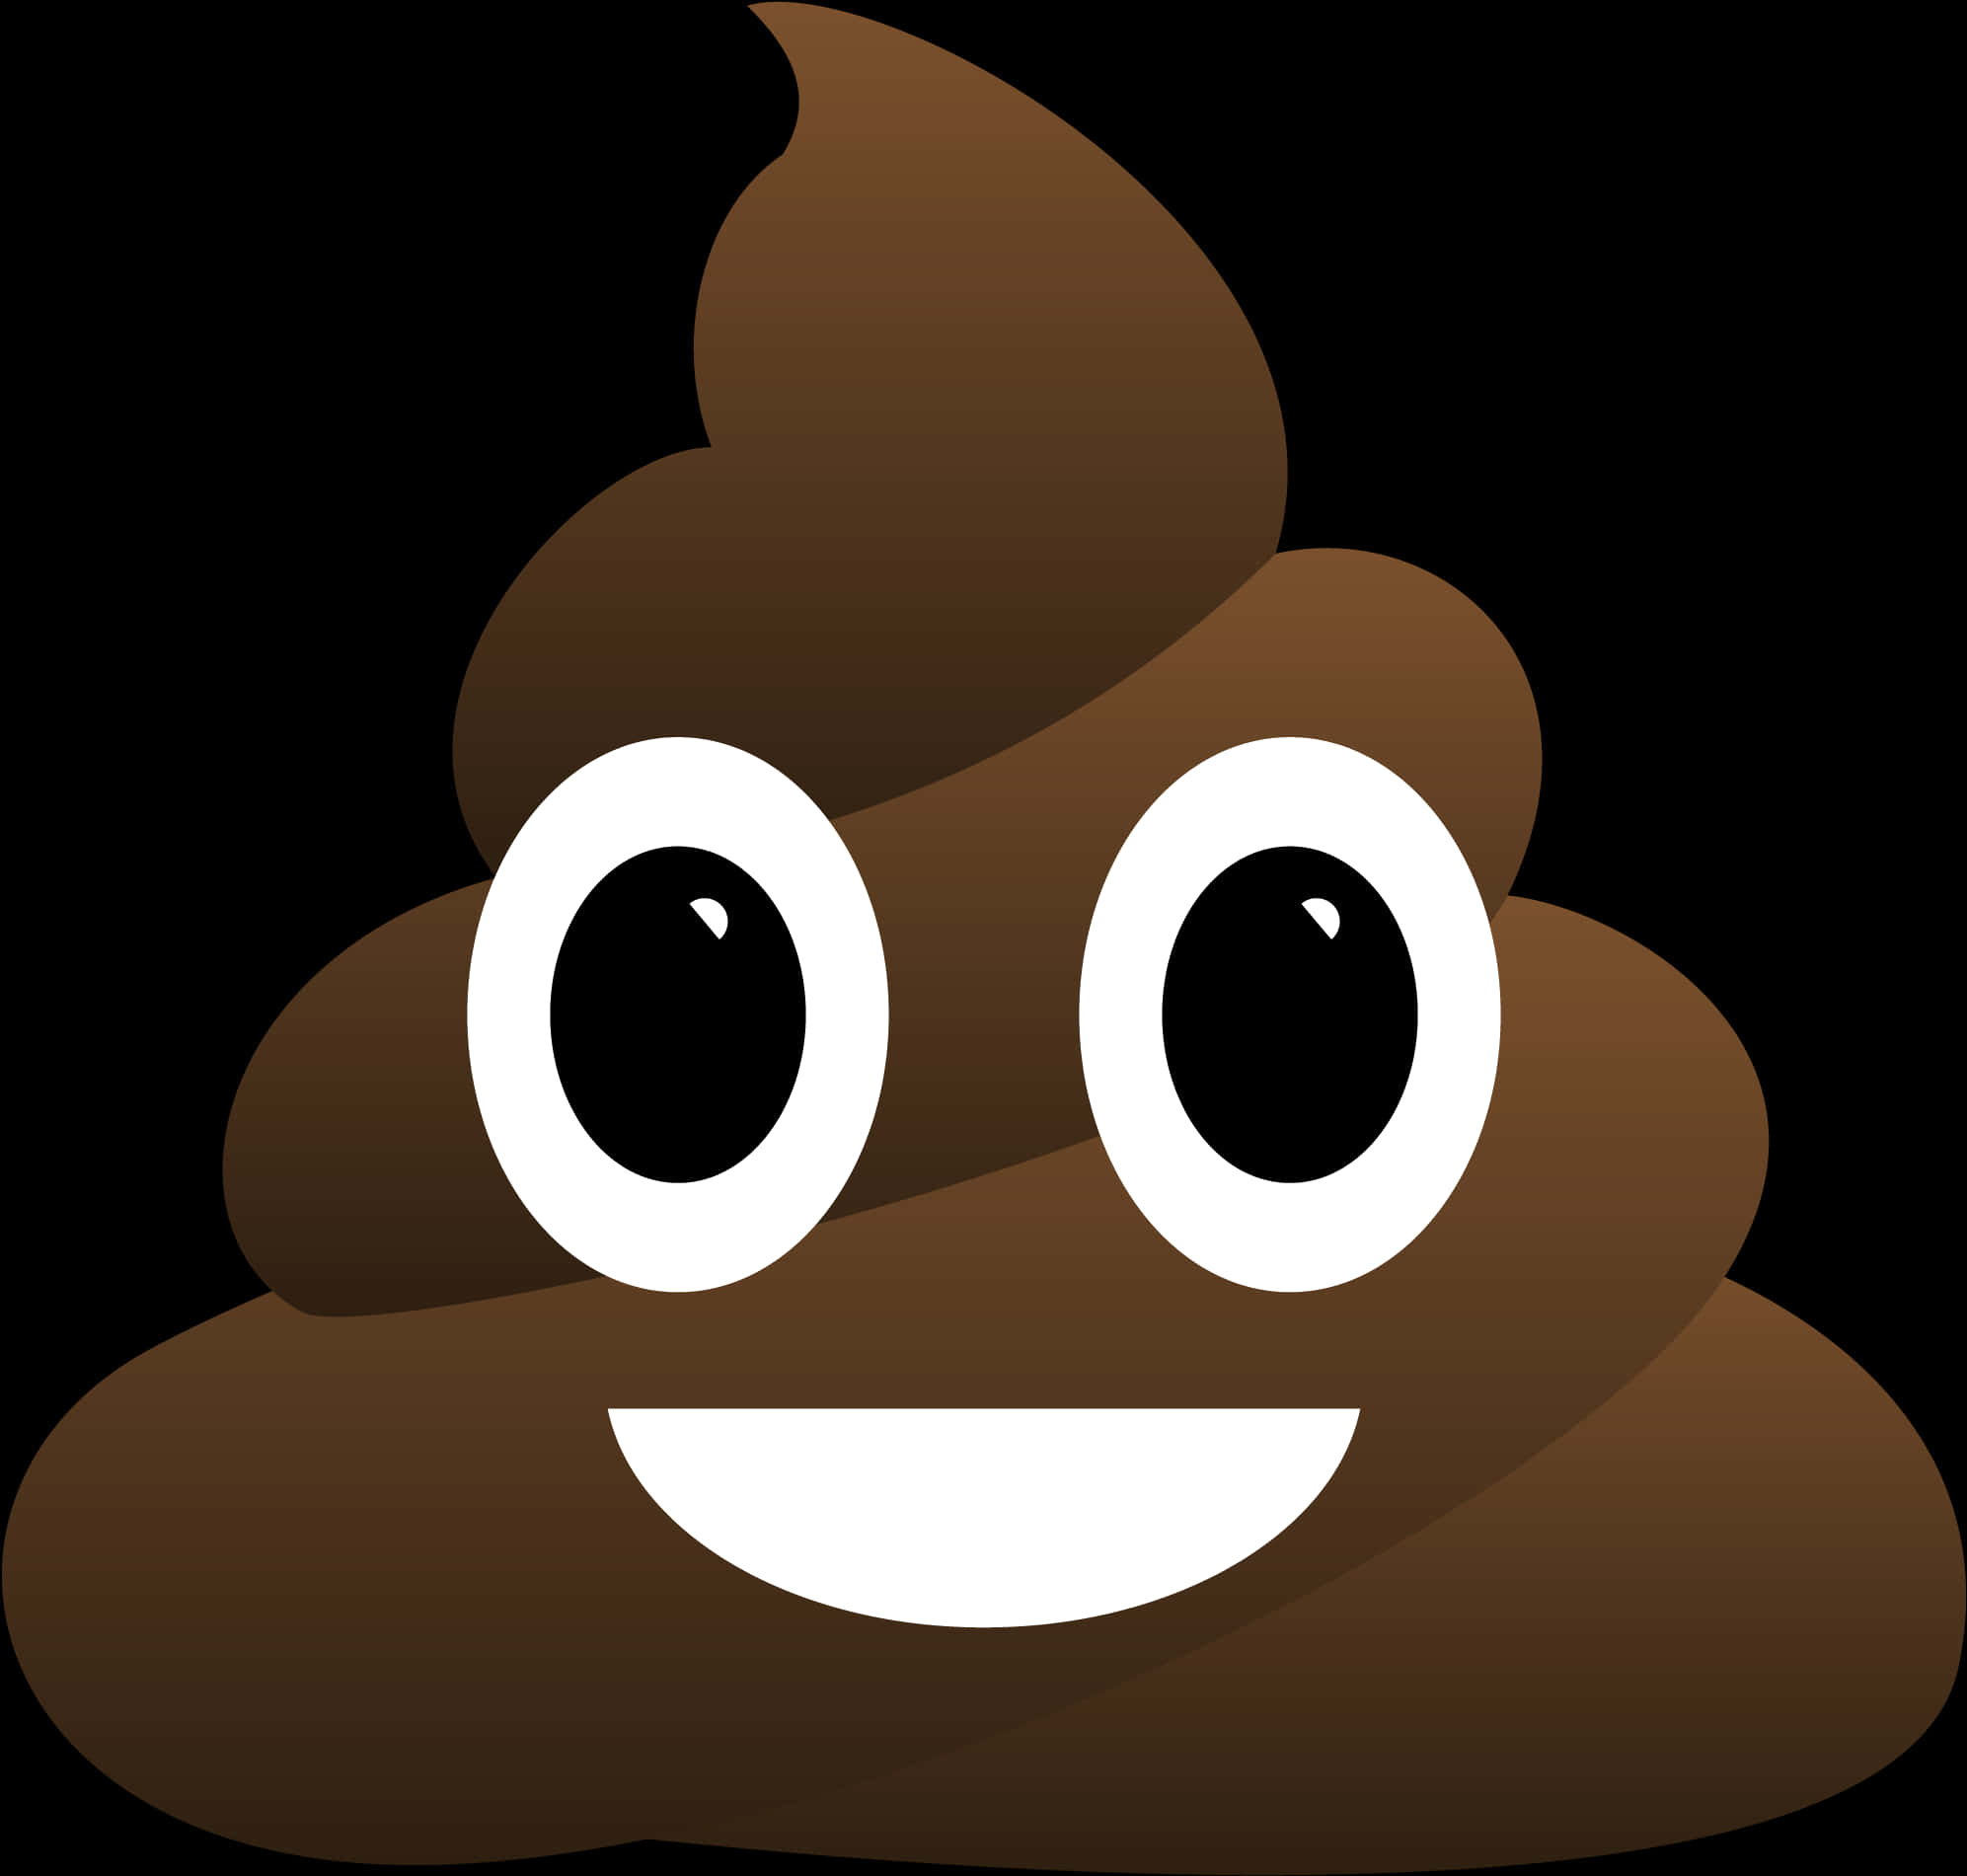 A Brown Poop With White Eyes